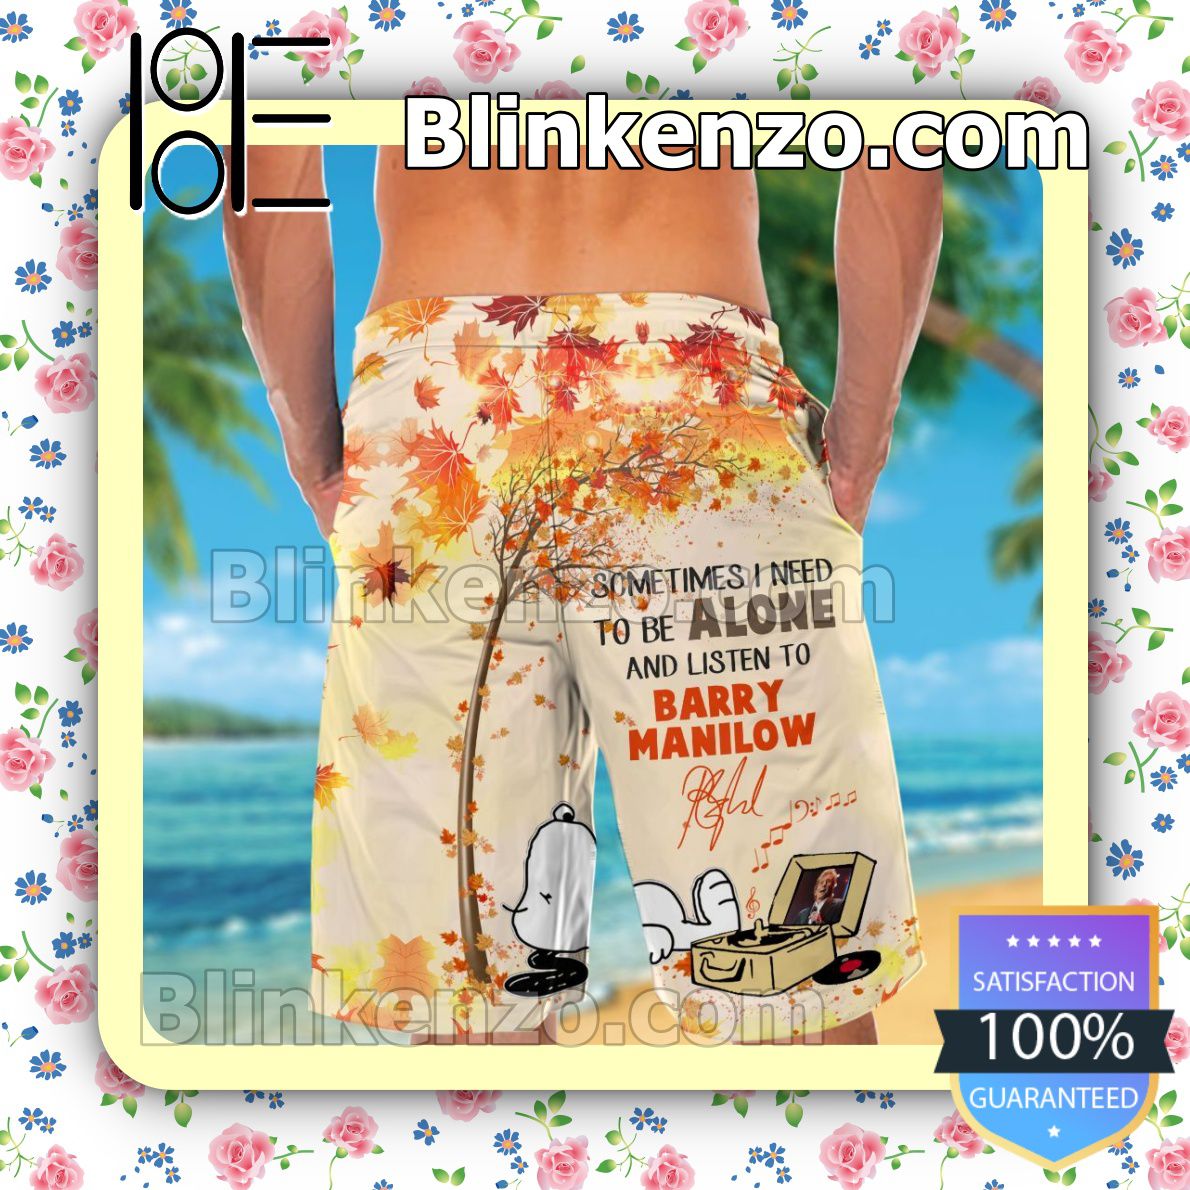 Review To Be Alone And Listen To Barry Manilow Mens Shirt, Swim Trunk